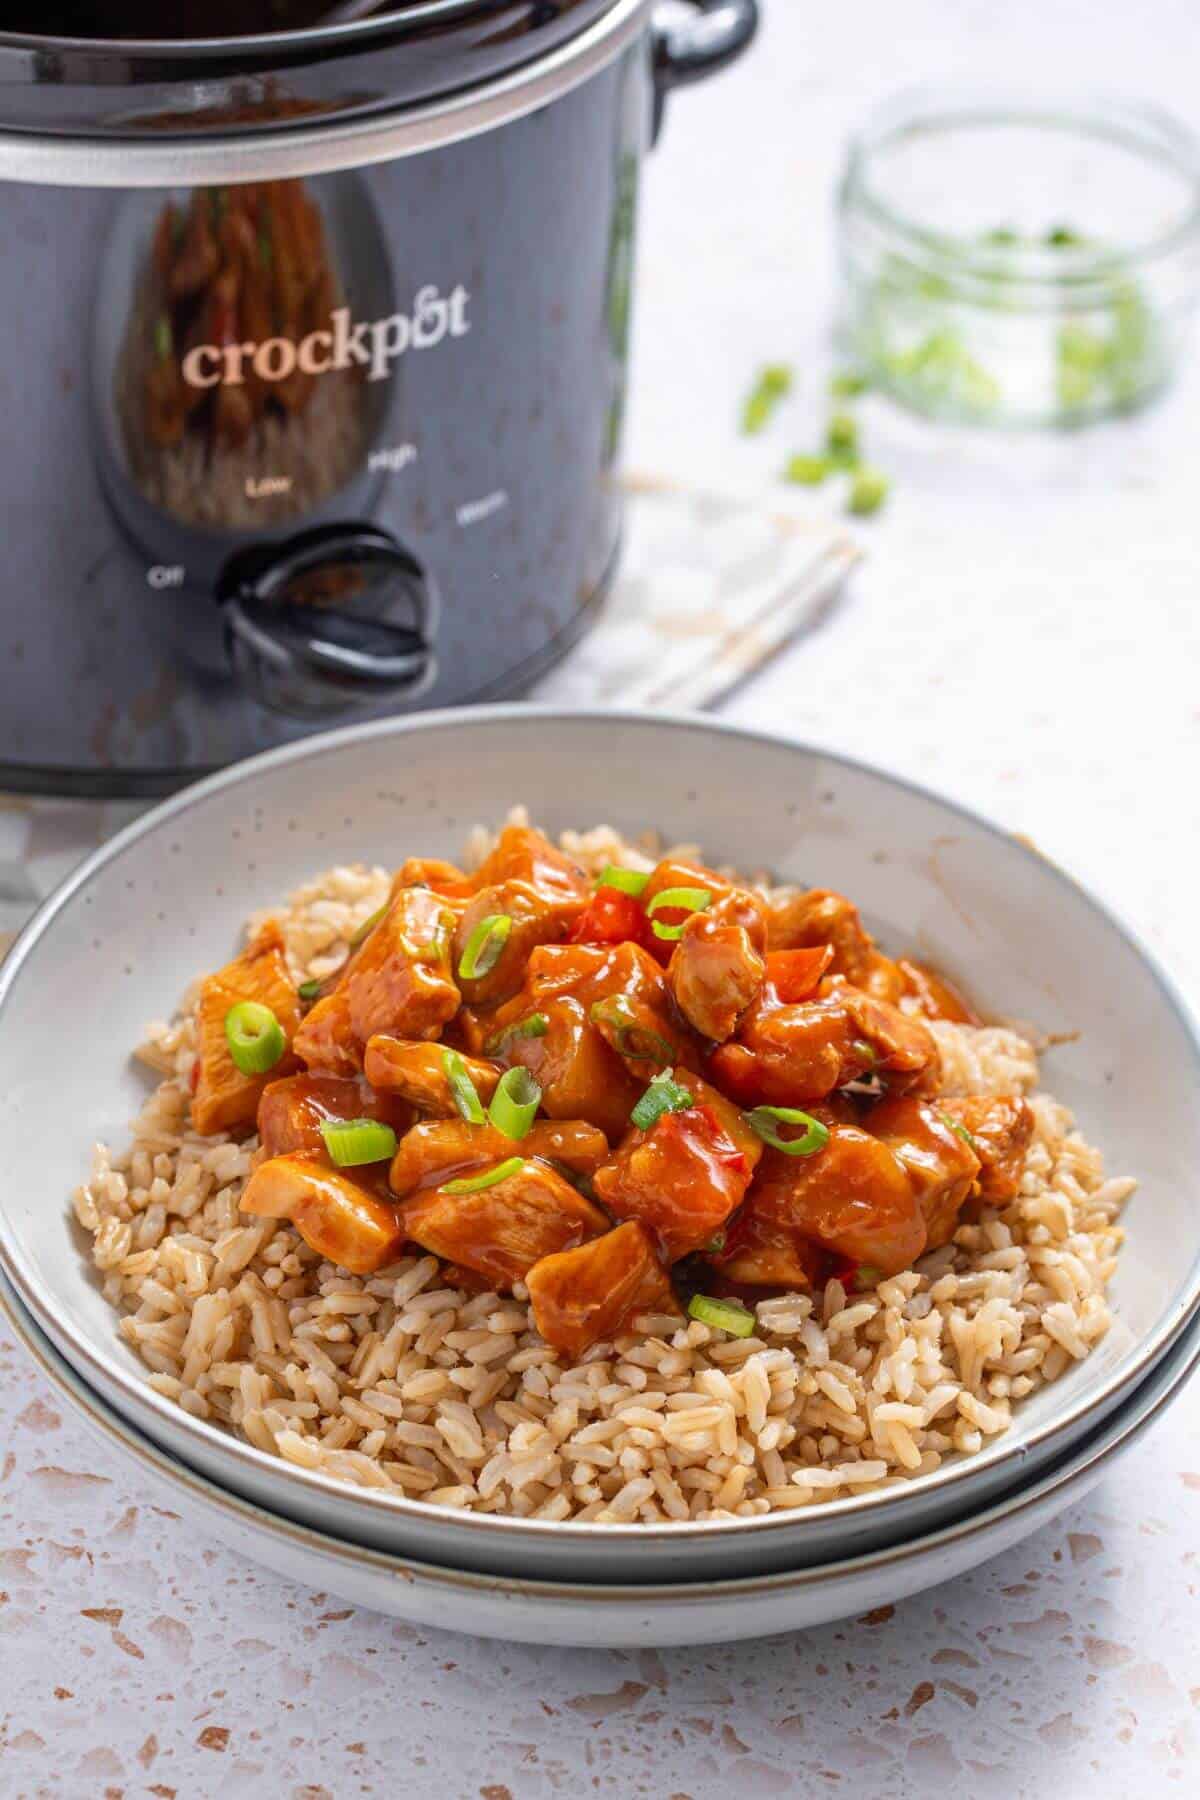 A bowl of rice and chicken in front of a crockpot.